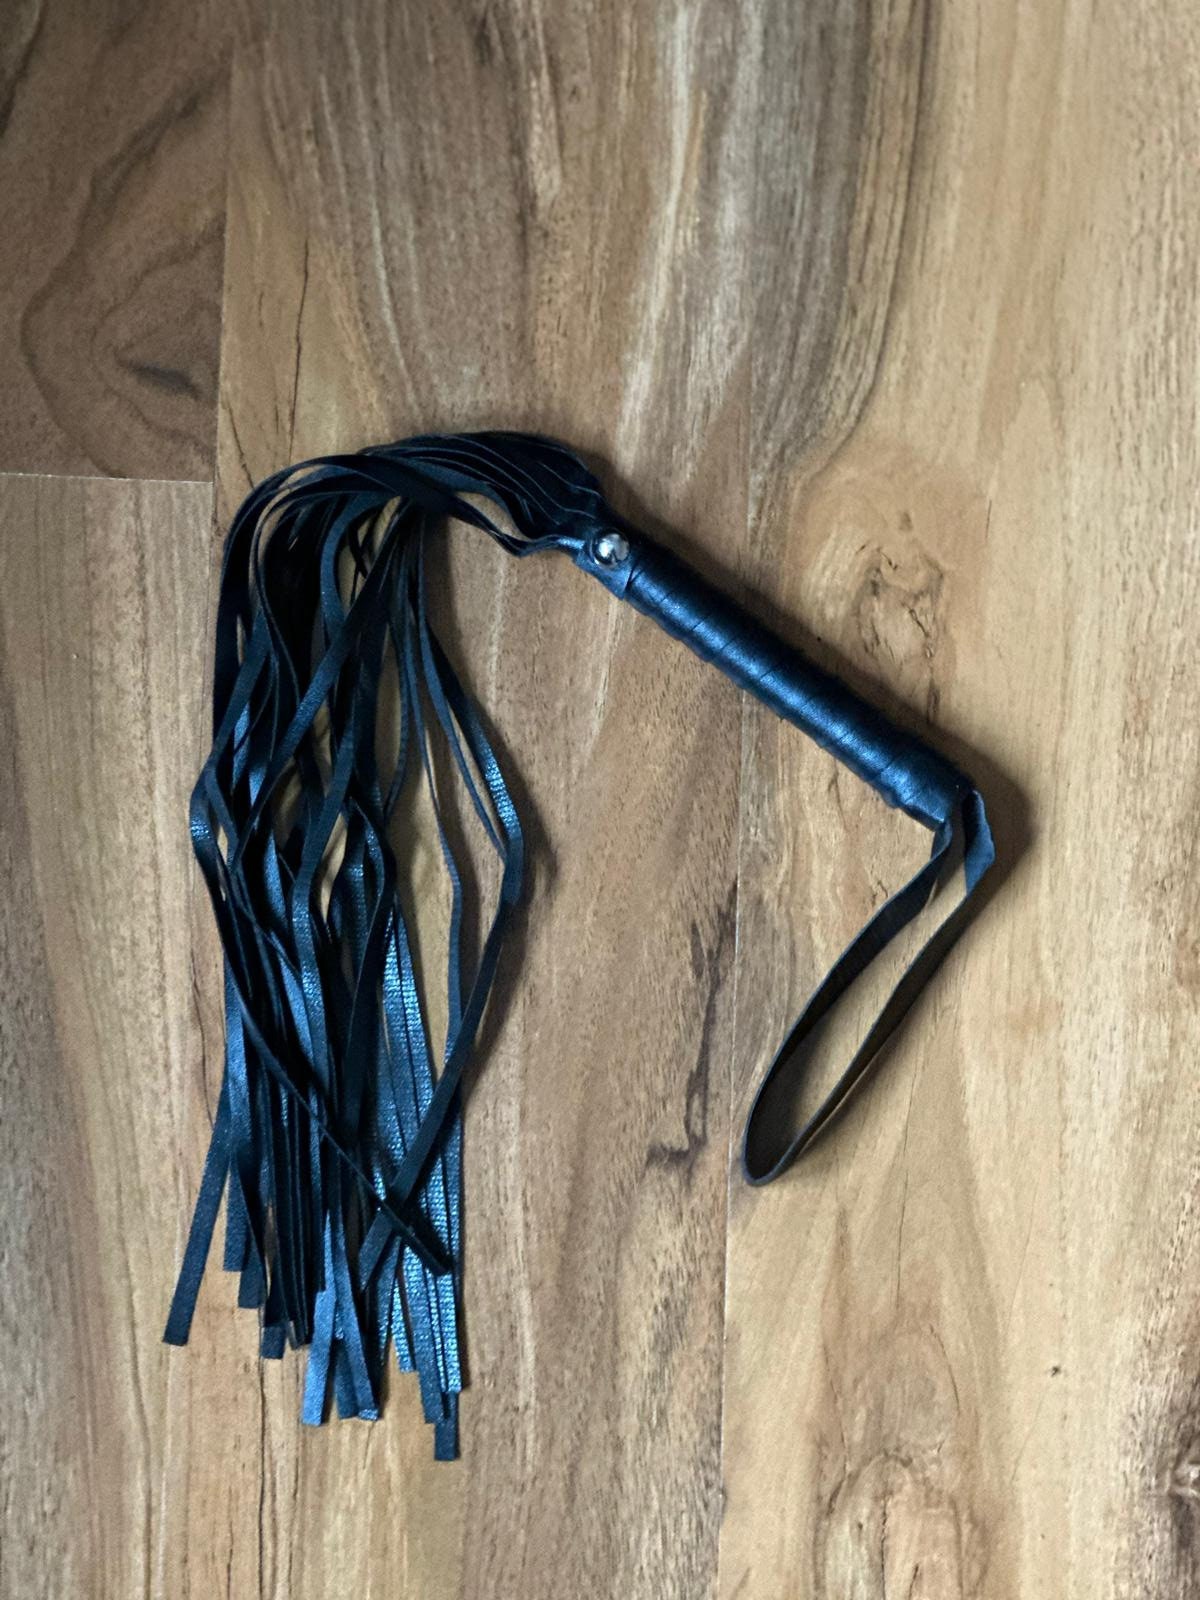 Strict Leather Steel Handle Heavy Tail Leather Flogger - Dallas Novelty -  Online Sex Toys Retailer